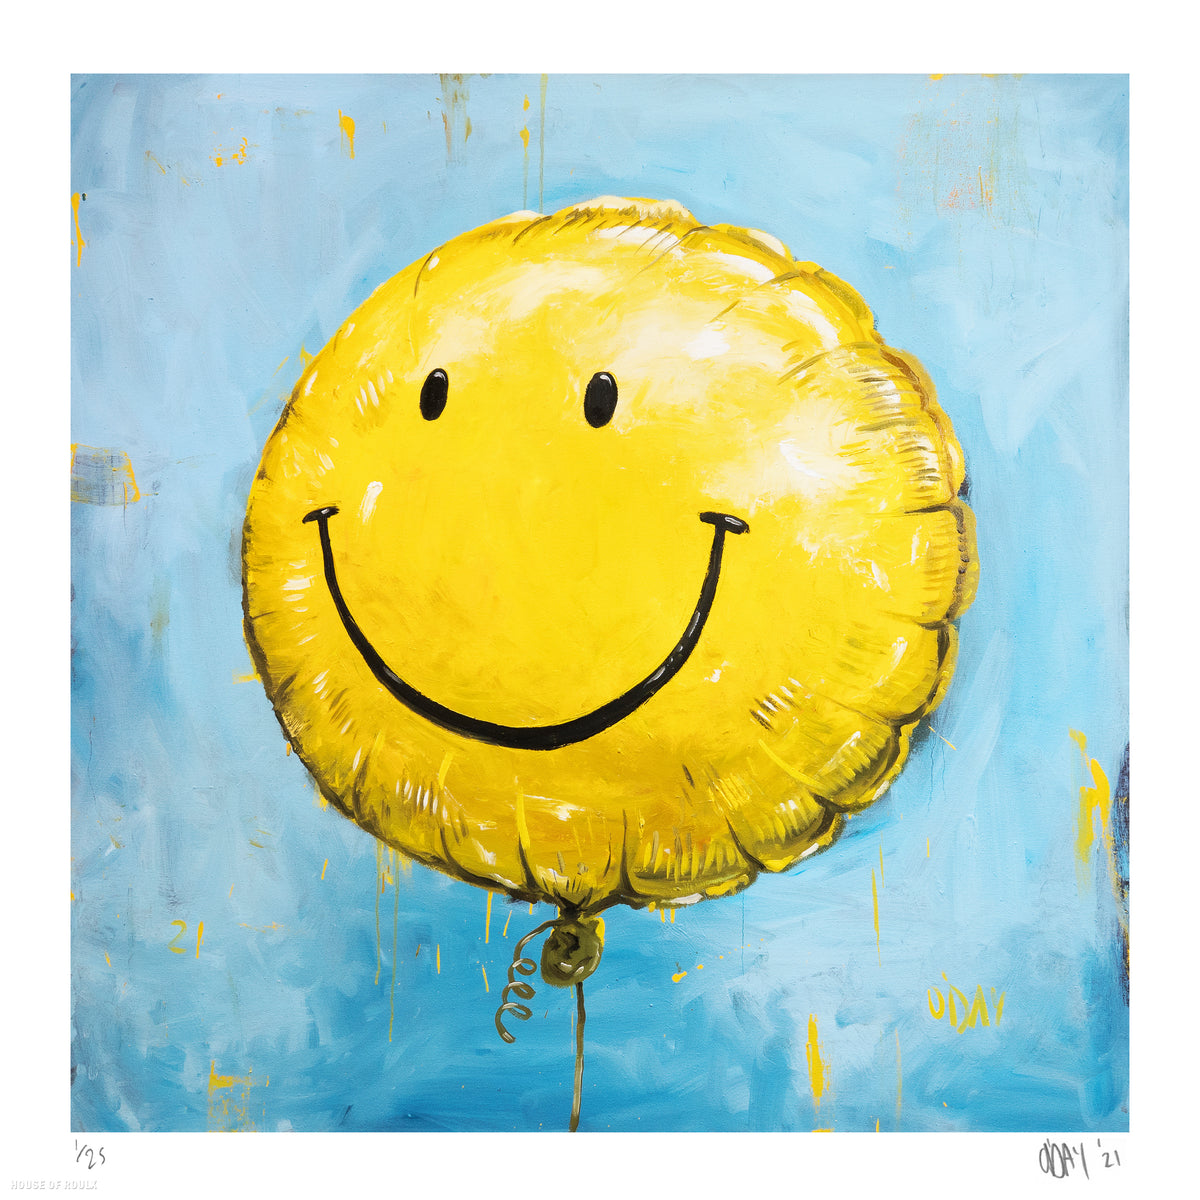 Adam J. O&#39;Day &quot;Smiley Face Balloon&quot; - Archival Print, Limited Edition of 25 - 17 x 17&quot;